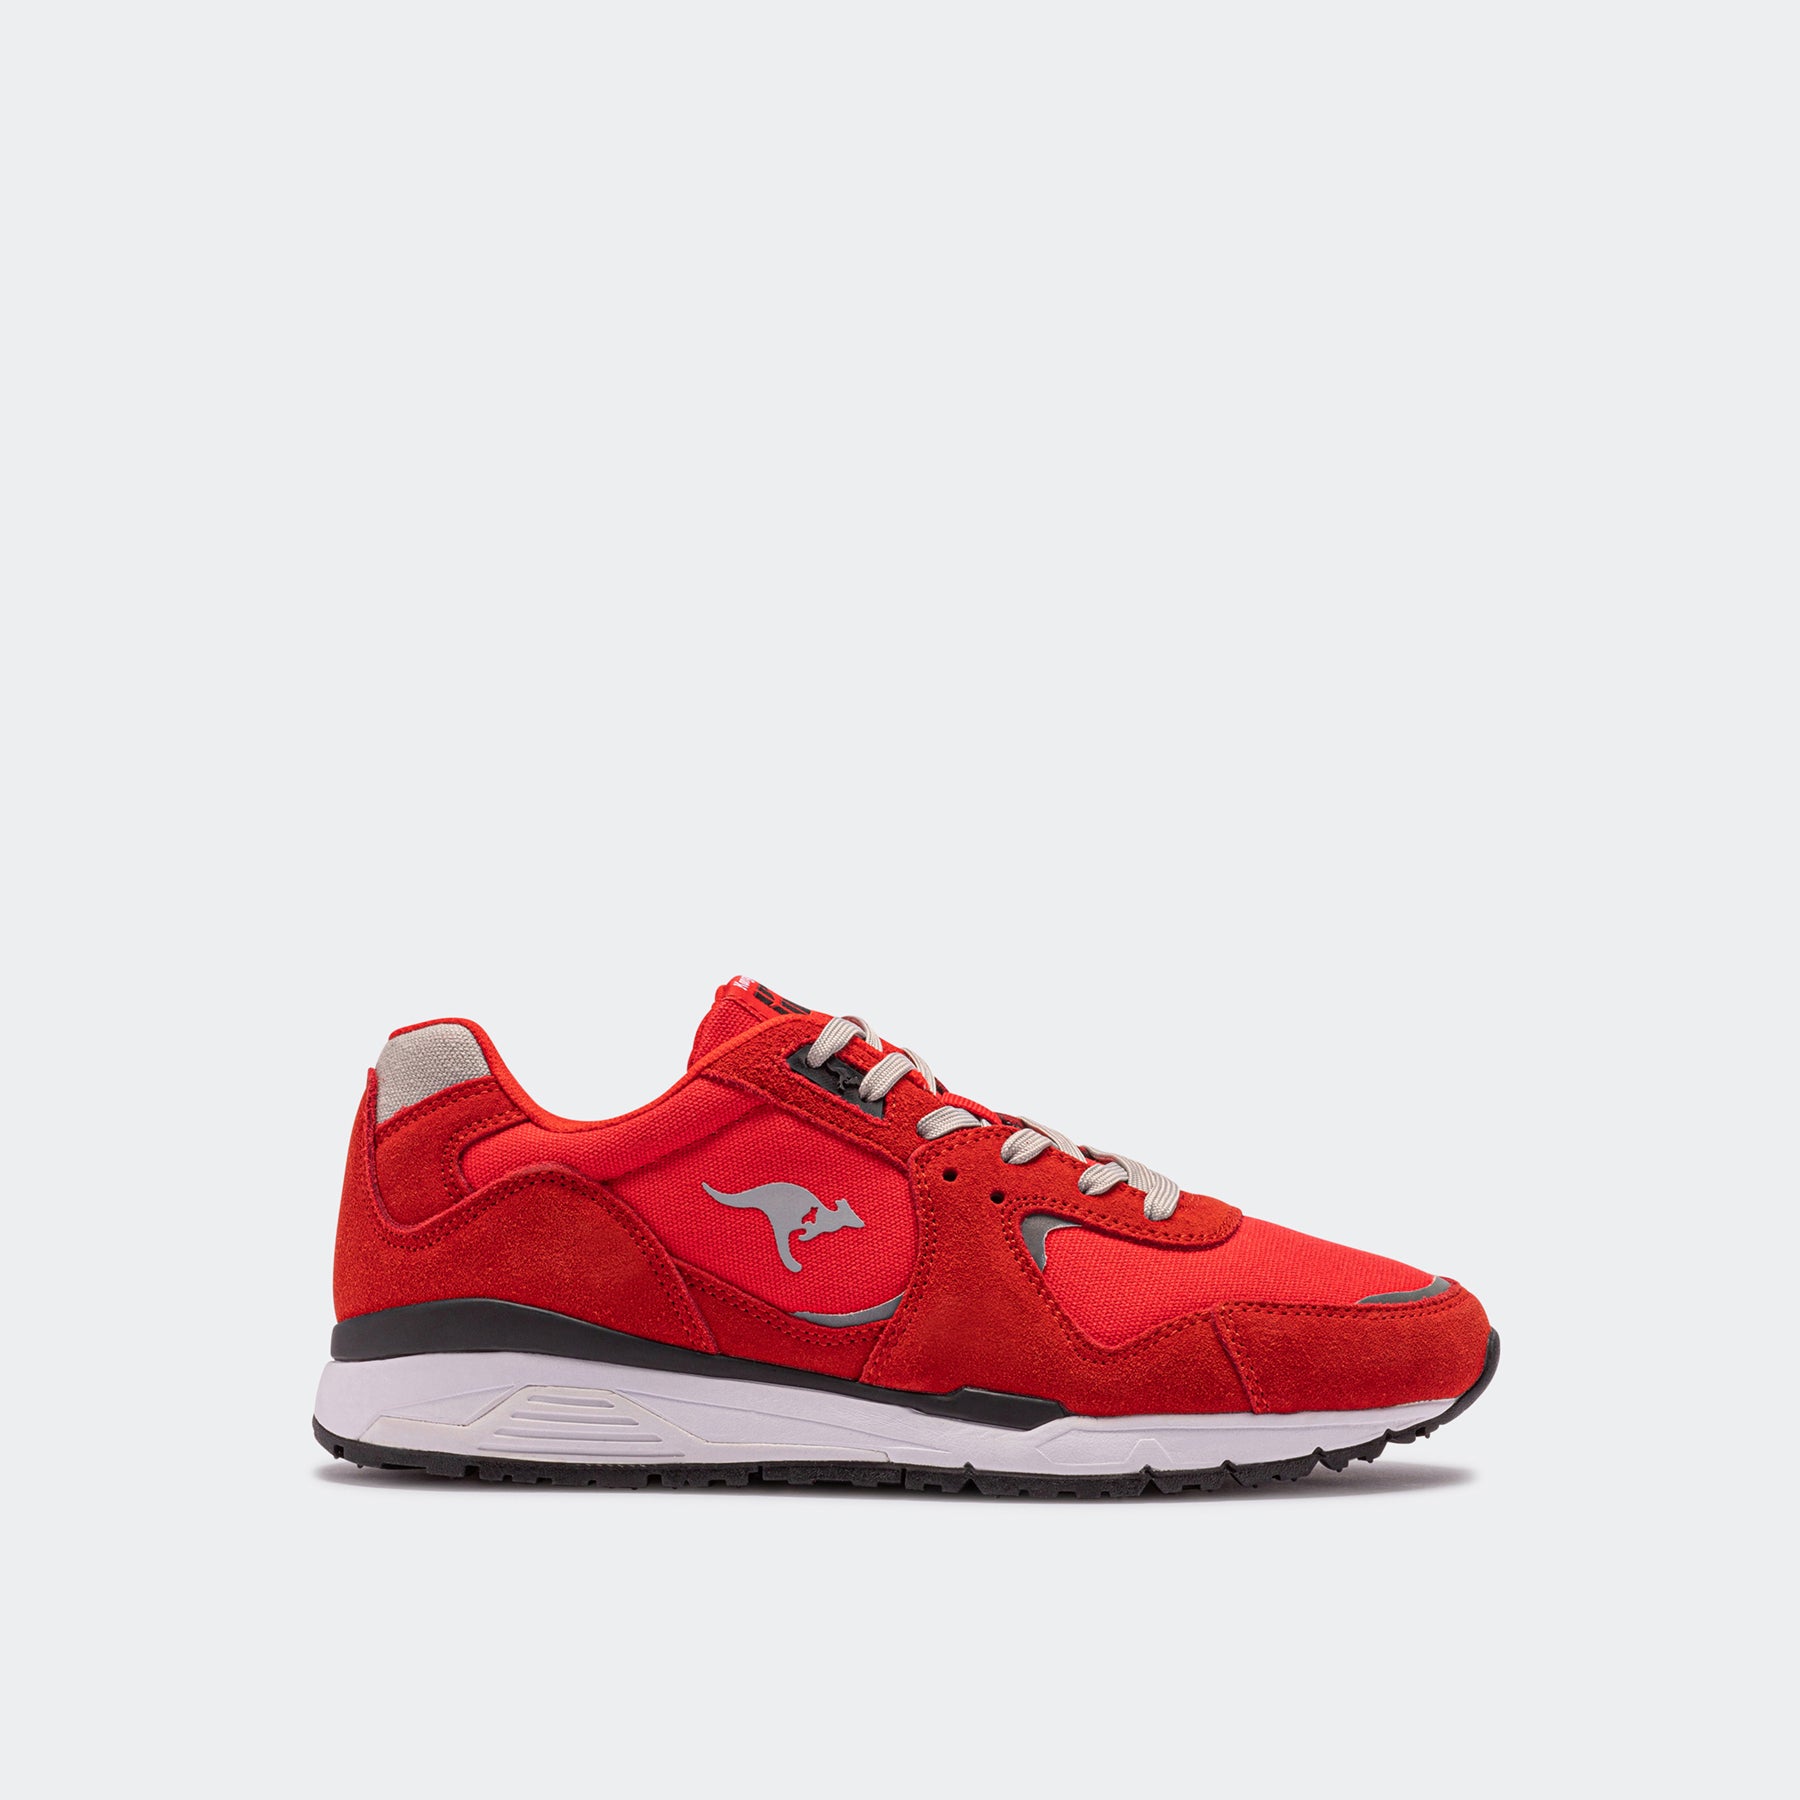 47248_6000_KangaROOS RED - Coil R2 Ultimate, women's sneakers, trend sneakers, high running comfort, high quality workmanship, premium quality, elegant, leisure shoe, KangaROOS, Hummel &Hummelamp; Hummel, men, men sneakers